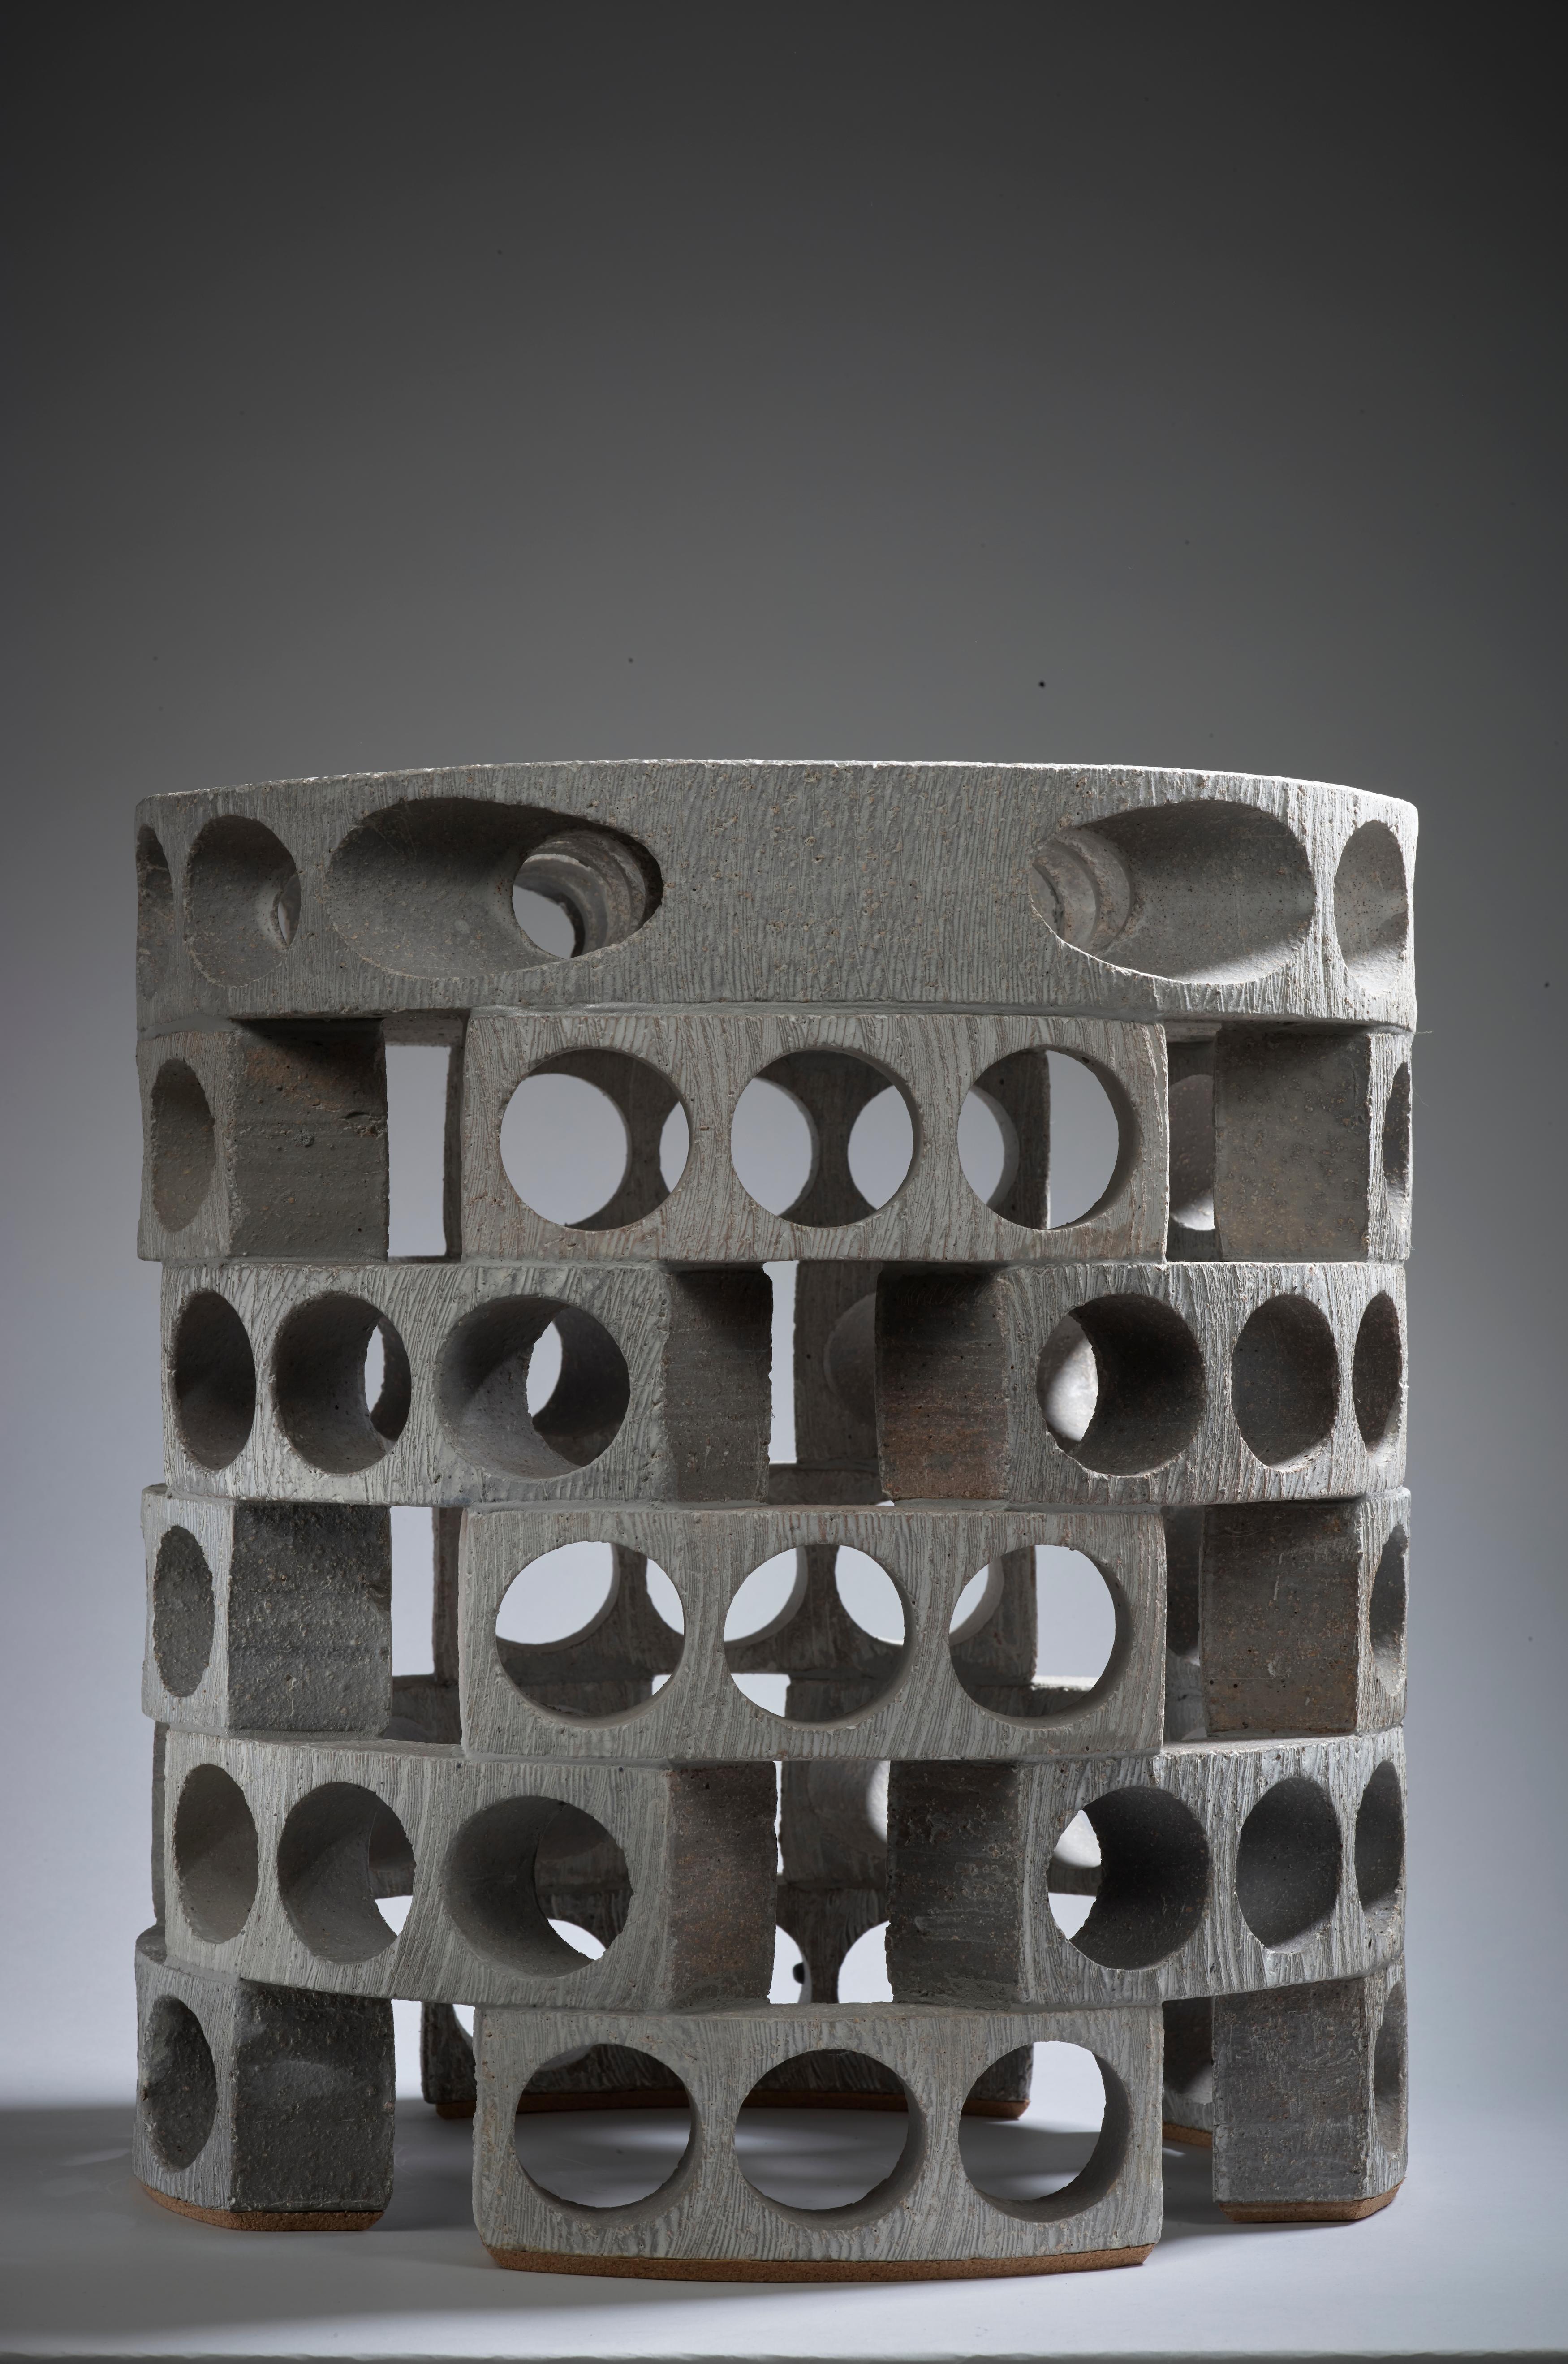 Maarten Stuer (born in 1965)
Stuul I-2021-08-14, 2021
Open-worked stoneware and engobe stool
Signed with the monogram and dated as the title

Created both for indoors and outdoors. 

Graduate of the Royal Academy of Fine Arts in Antwerp, where he